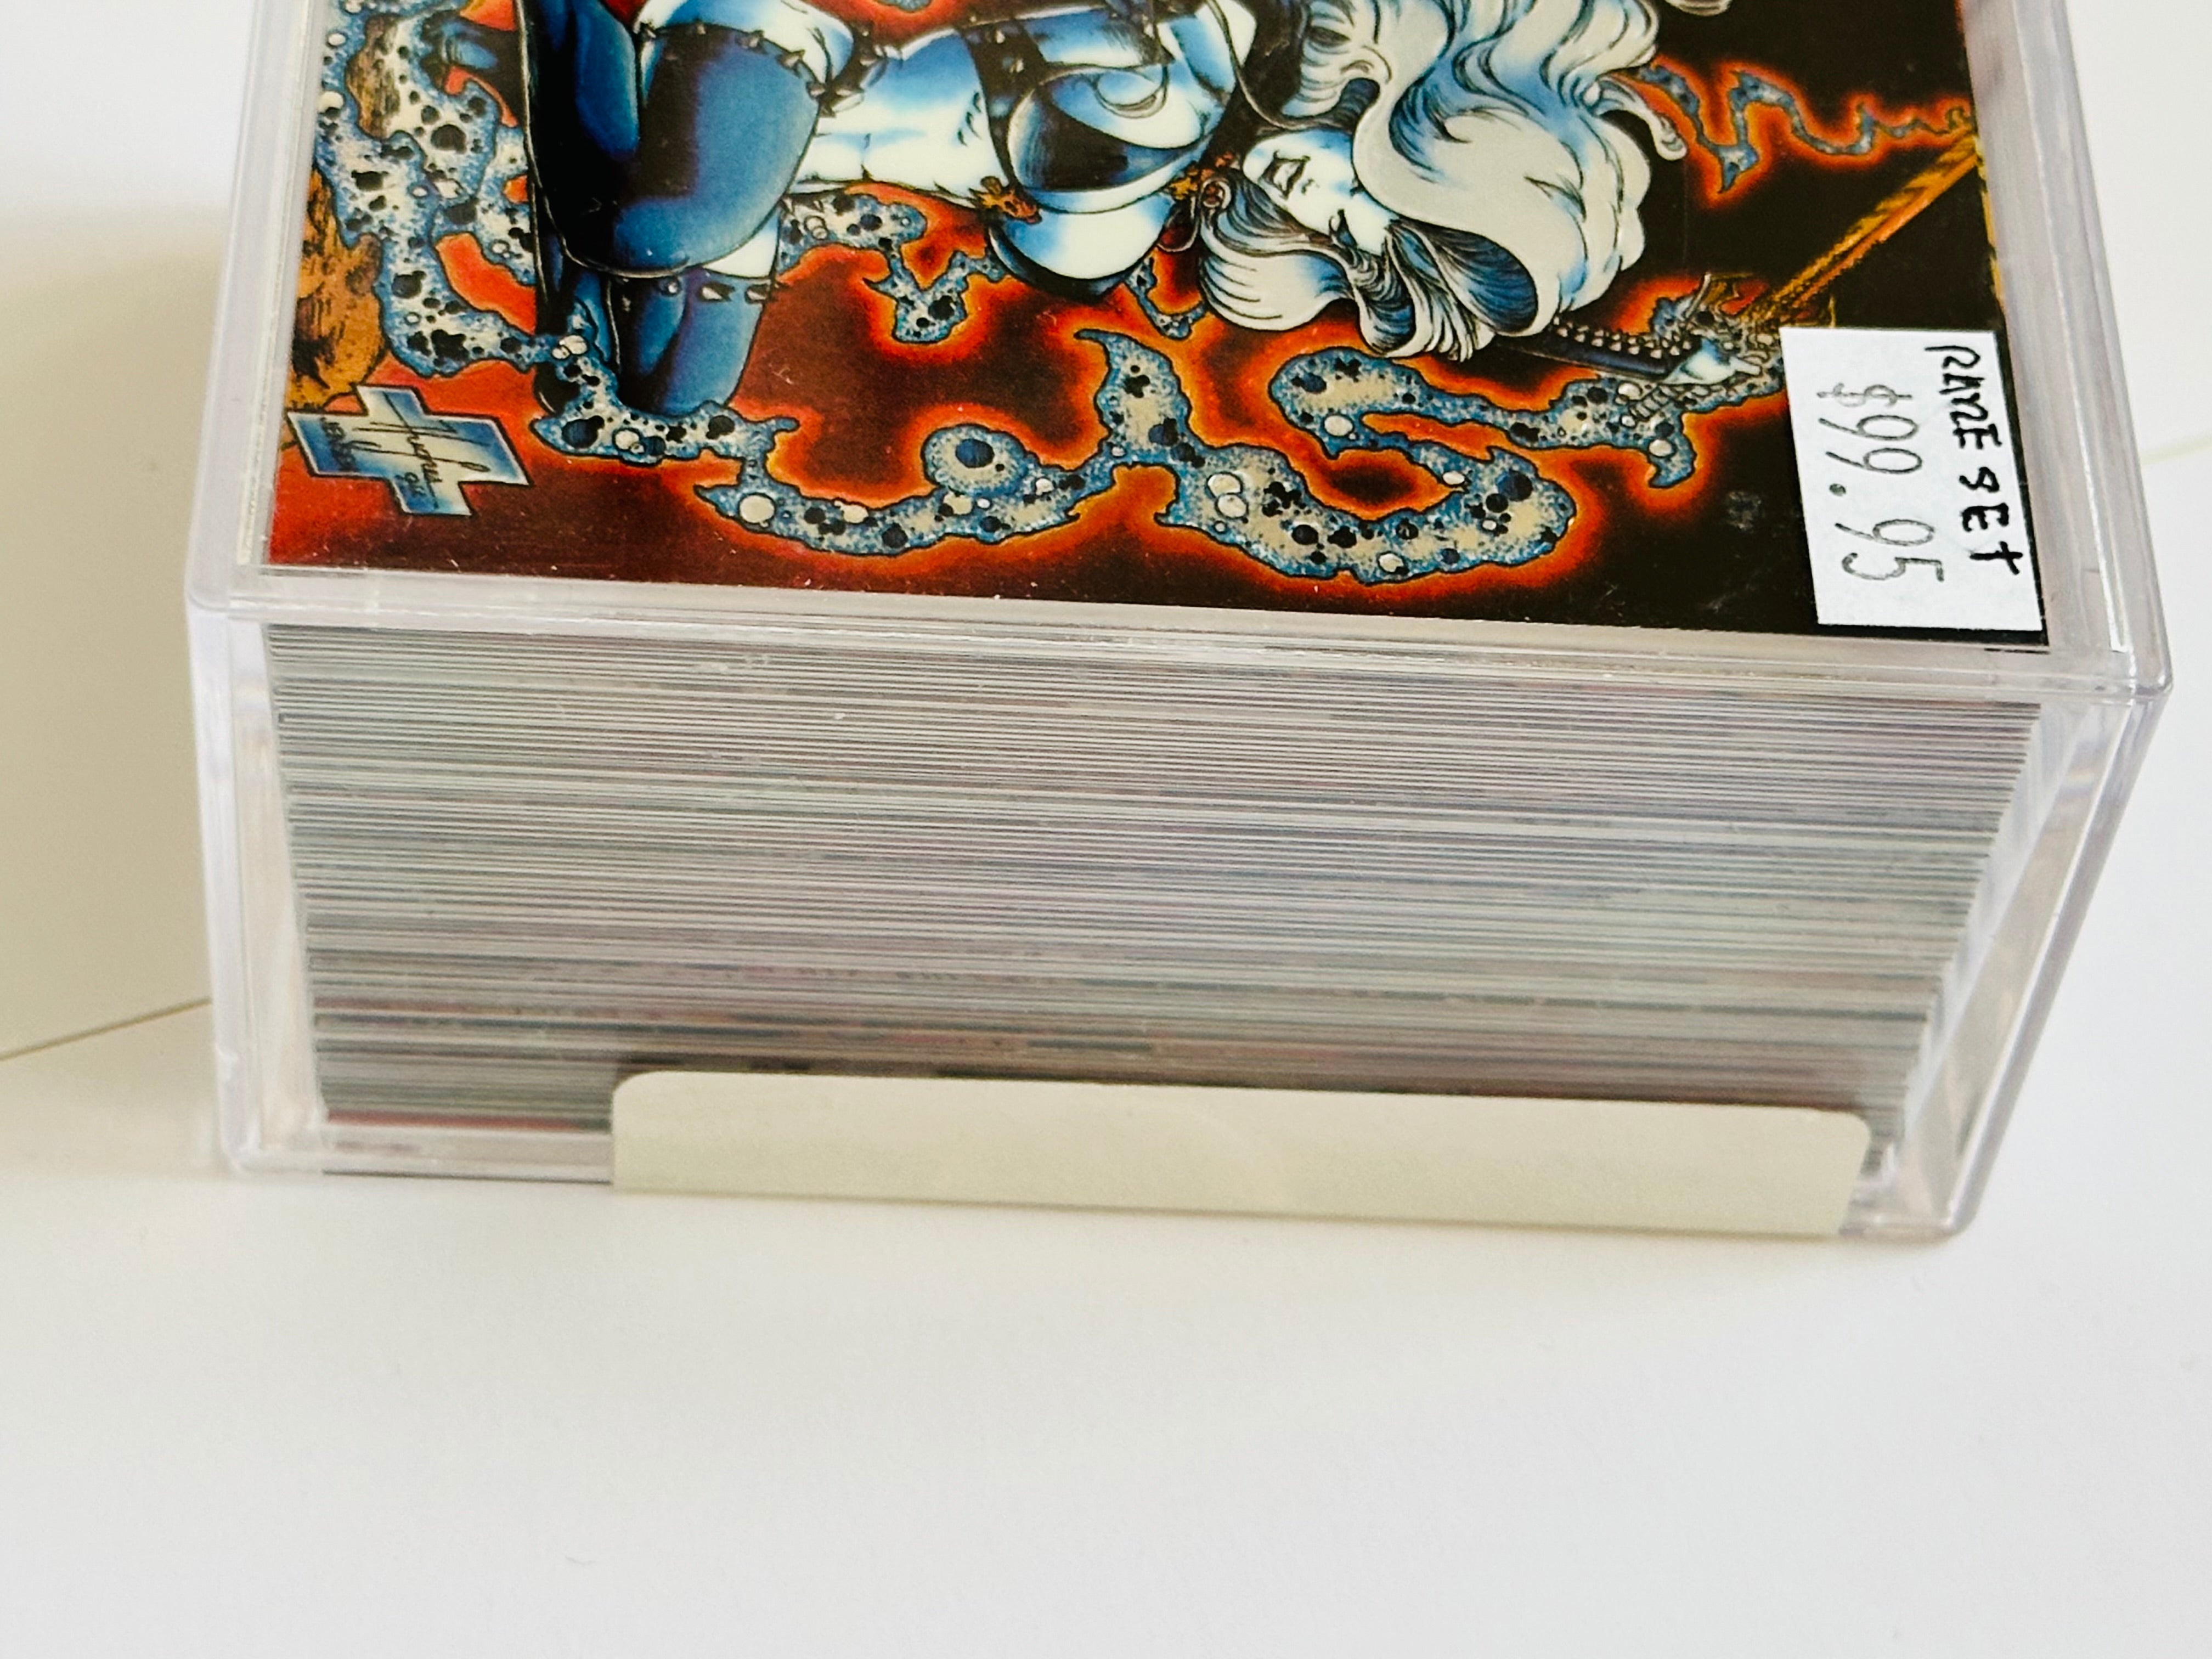 Lady death series, one high-grade condition all chromium card set 1994